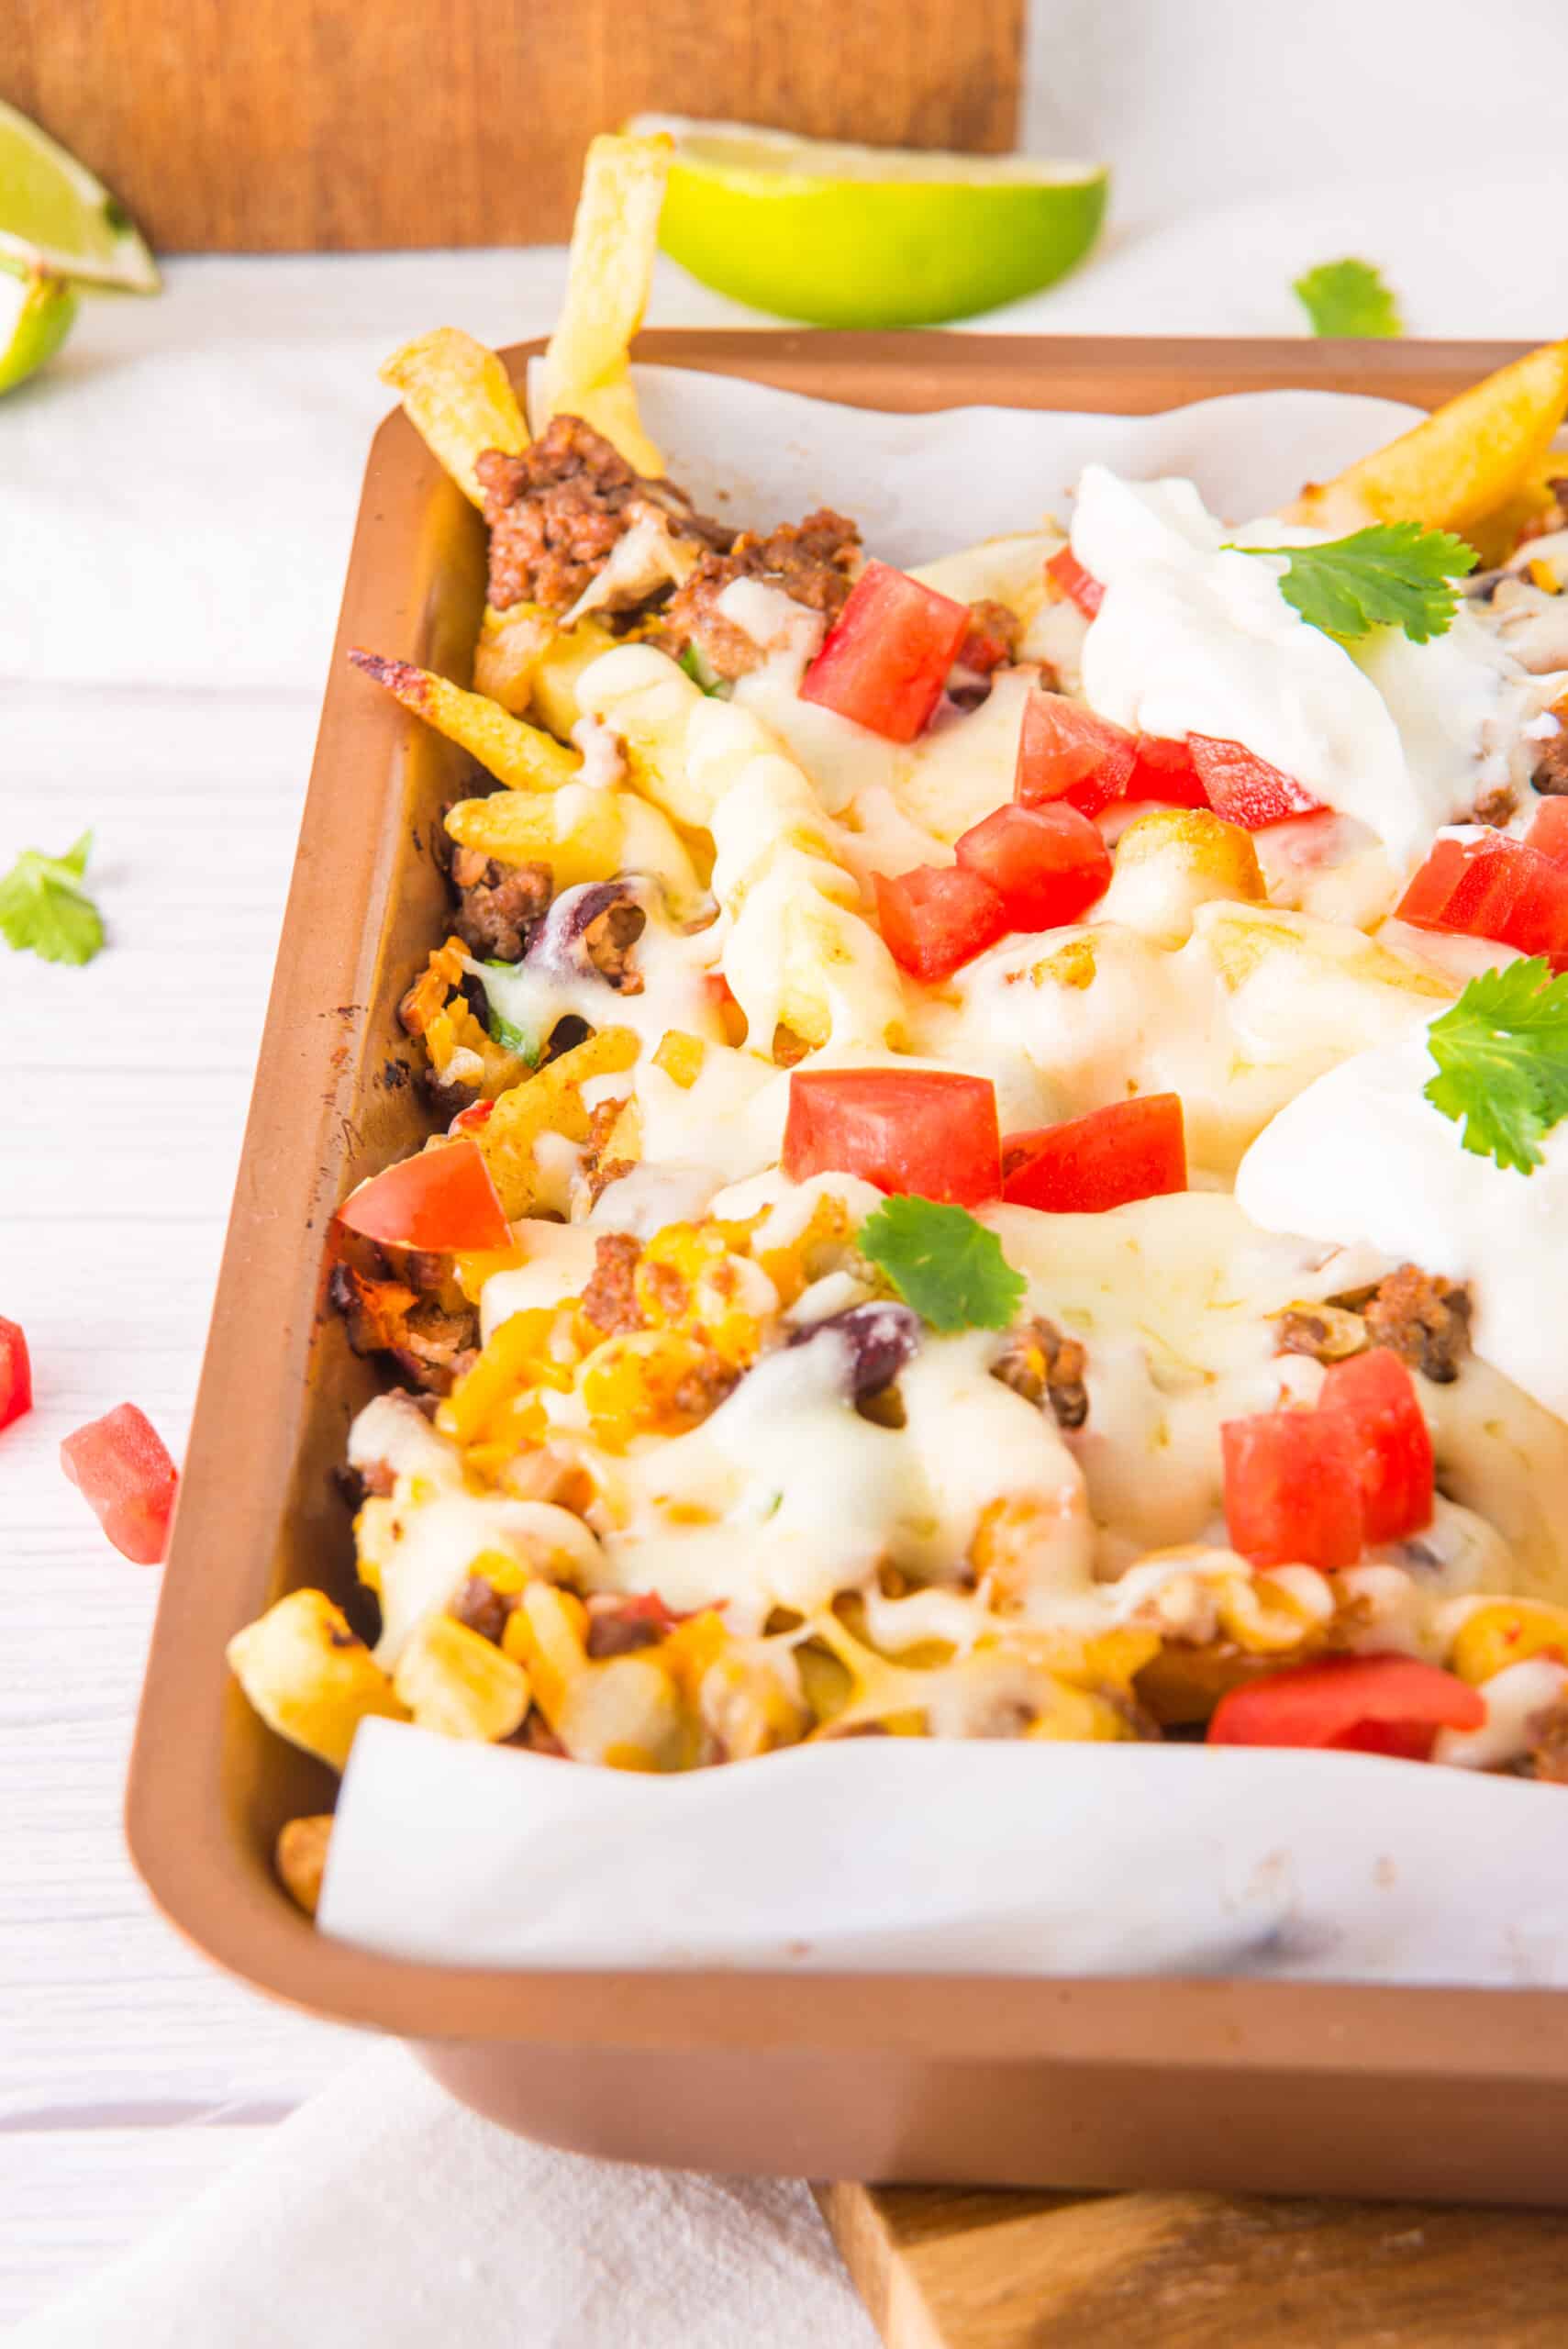 chili cheese fries in a baking dish